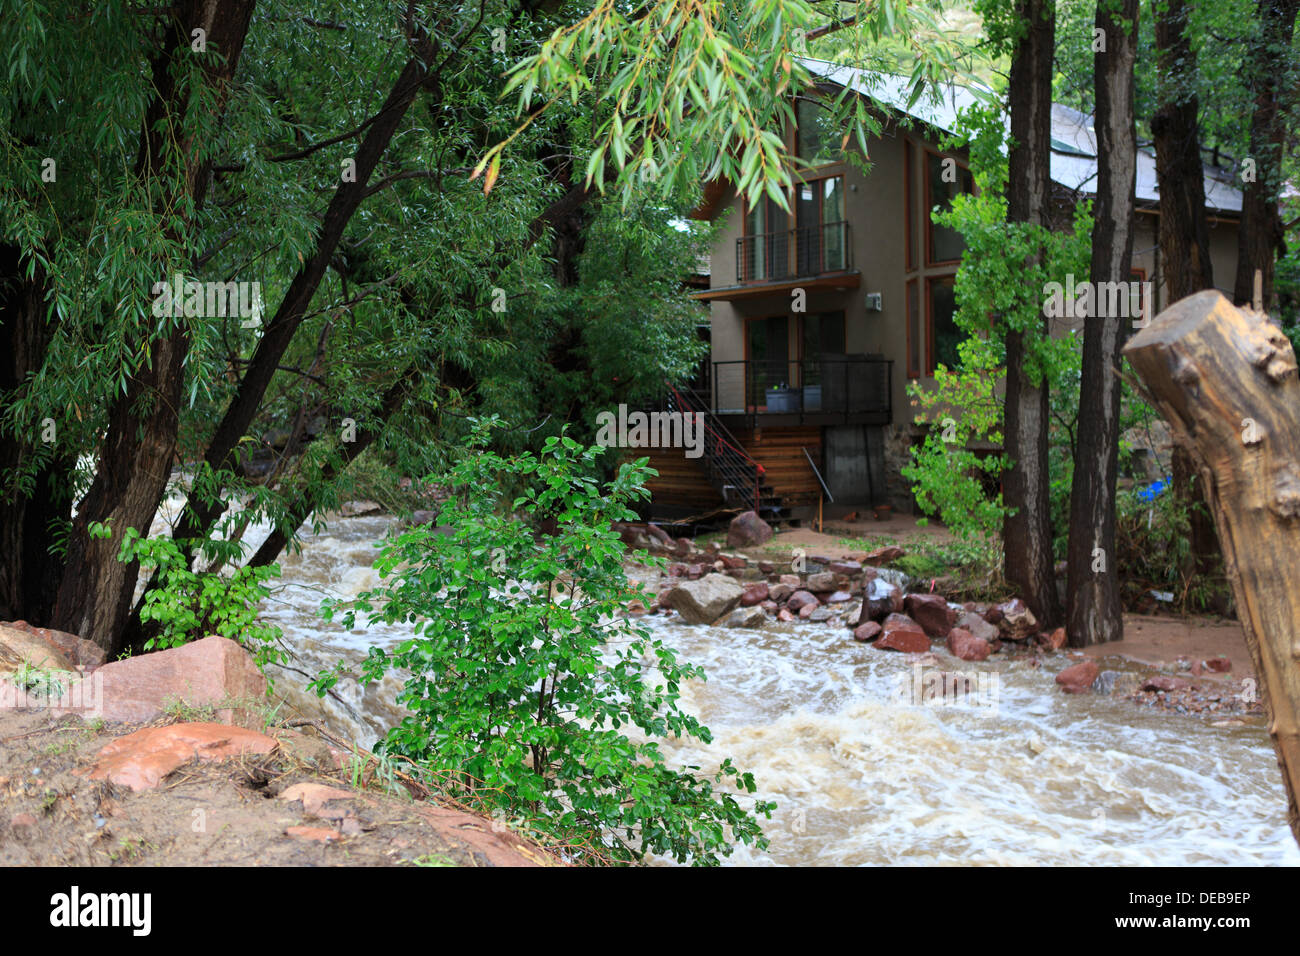 Boulder, CO. 15th September 2013 - A home in Eldorado Springs is threatened by a rain swollen creek in Eldorado Canyon.  The final wave of rain storms make their way through Boulder, Colorado bringing another day of flooding to the rain swollen area. © Ed Endicott / Alamy Live News Stock Photo